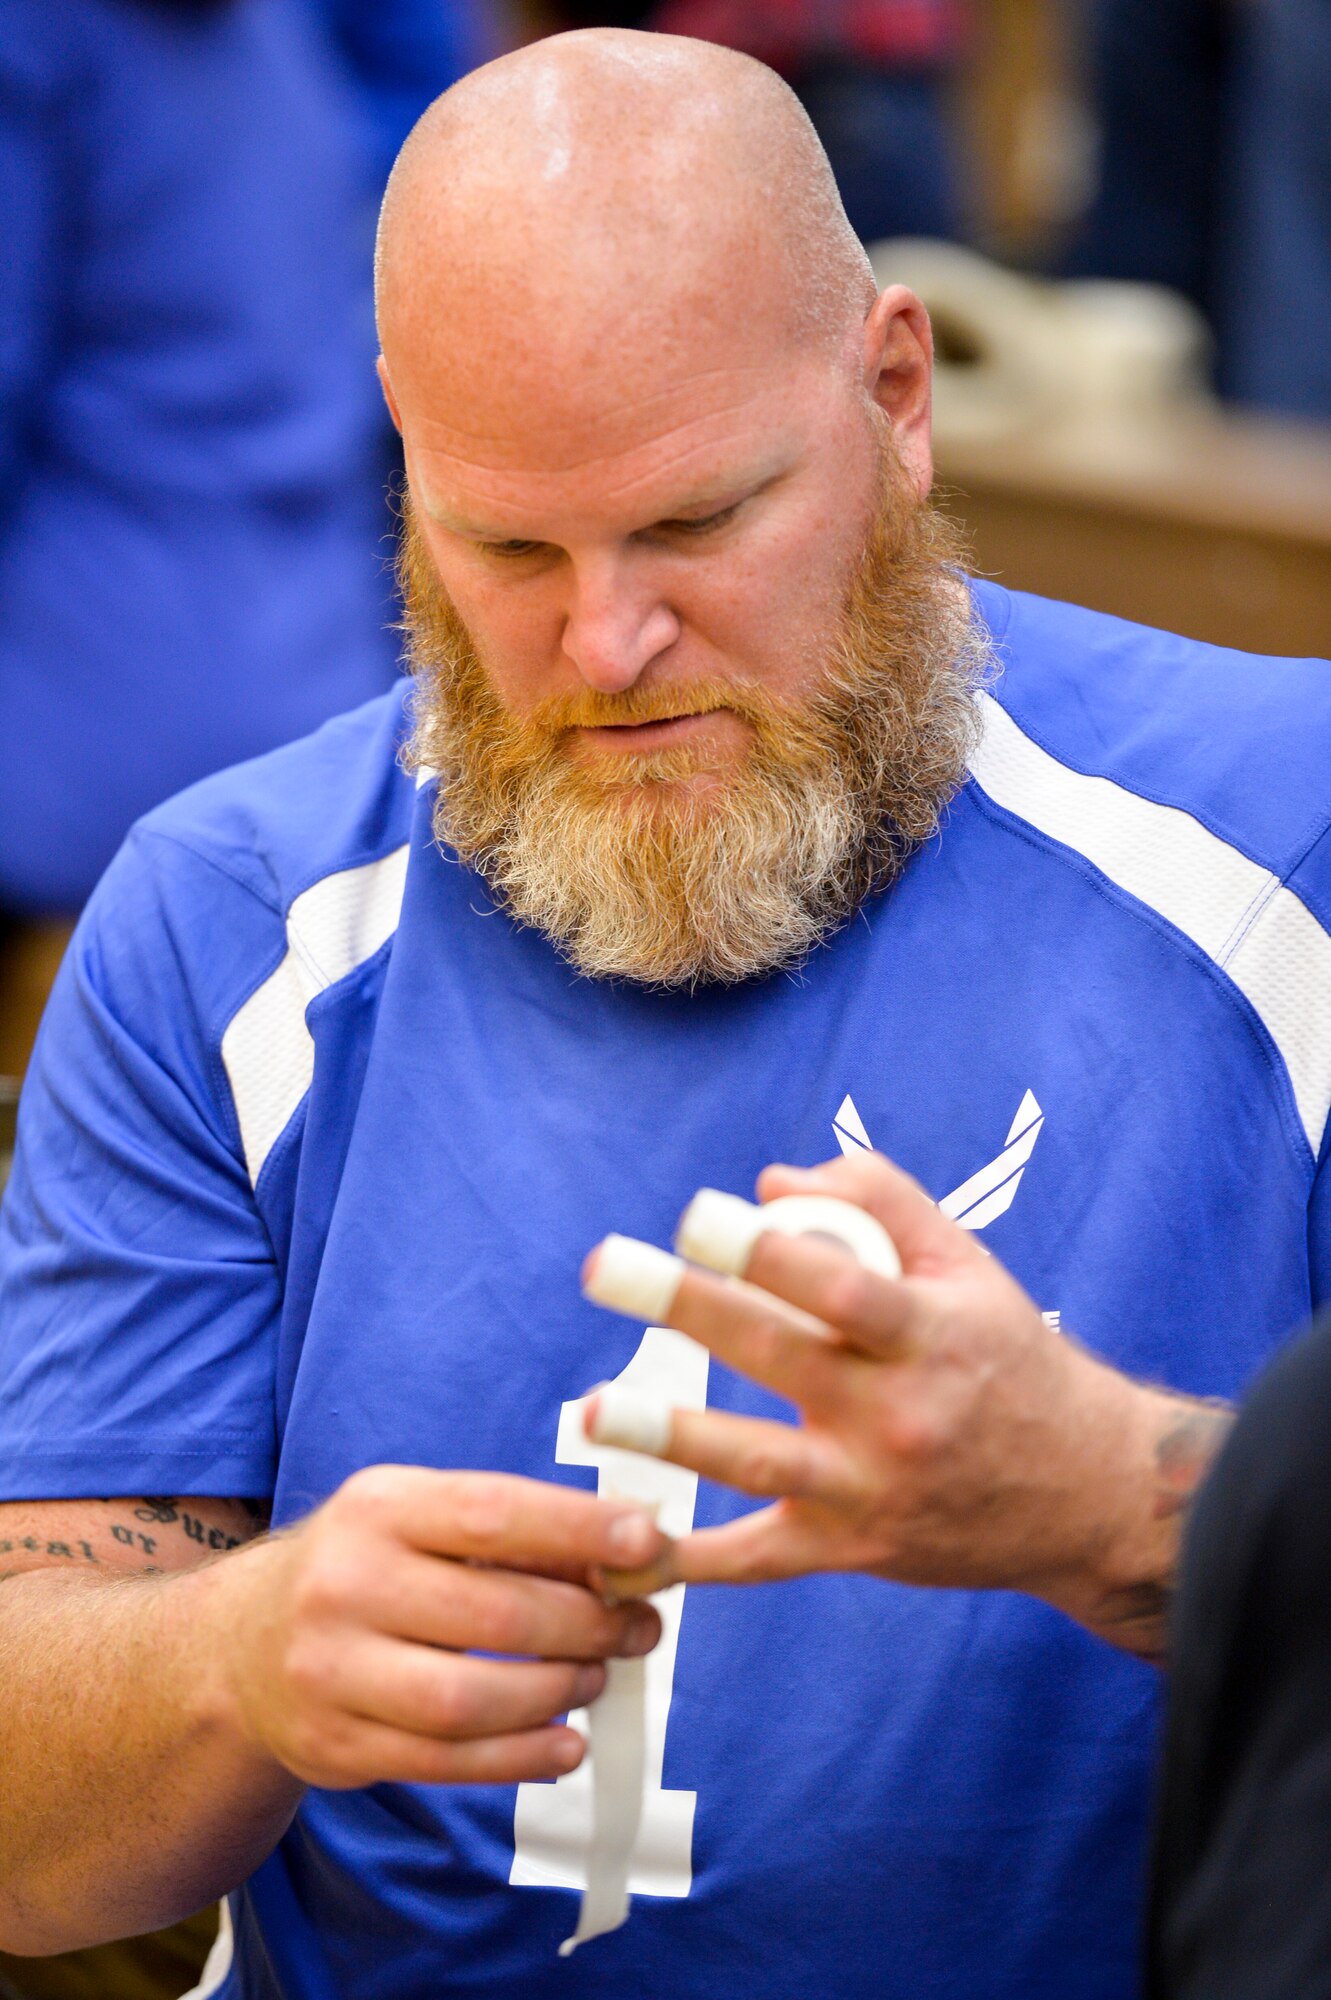 Retired Air Force Tech. Sgt. Ketih Sekora tapes up his fingertips prior to the start of the 2014 Warrior Games sitting volleyball bronze medal match between the Air Force and the Army Oct. 1, 2014, at the U.S. Olympic Training Center in Colorado Springs, Colo. The Army beat the Air Force in two sets, 25-20, 25-19. (U.S. Air Force photo/Staff Sgt. Devon Suits)